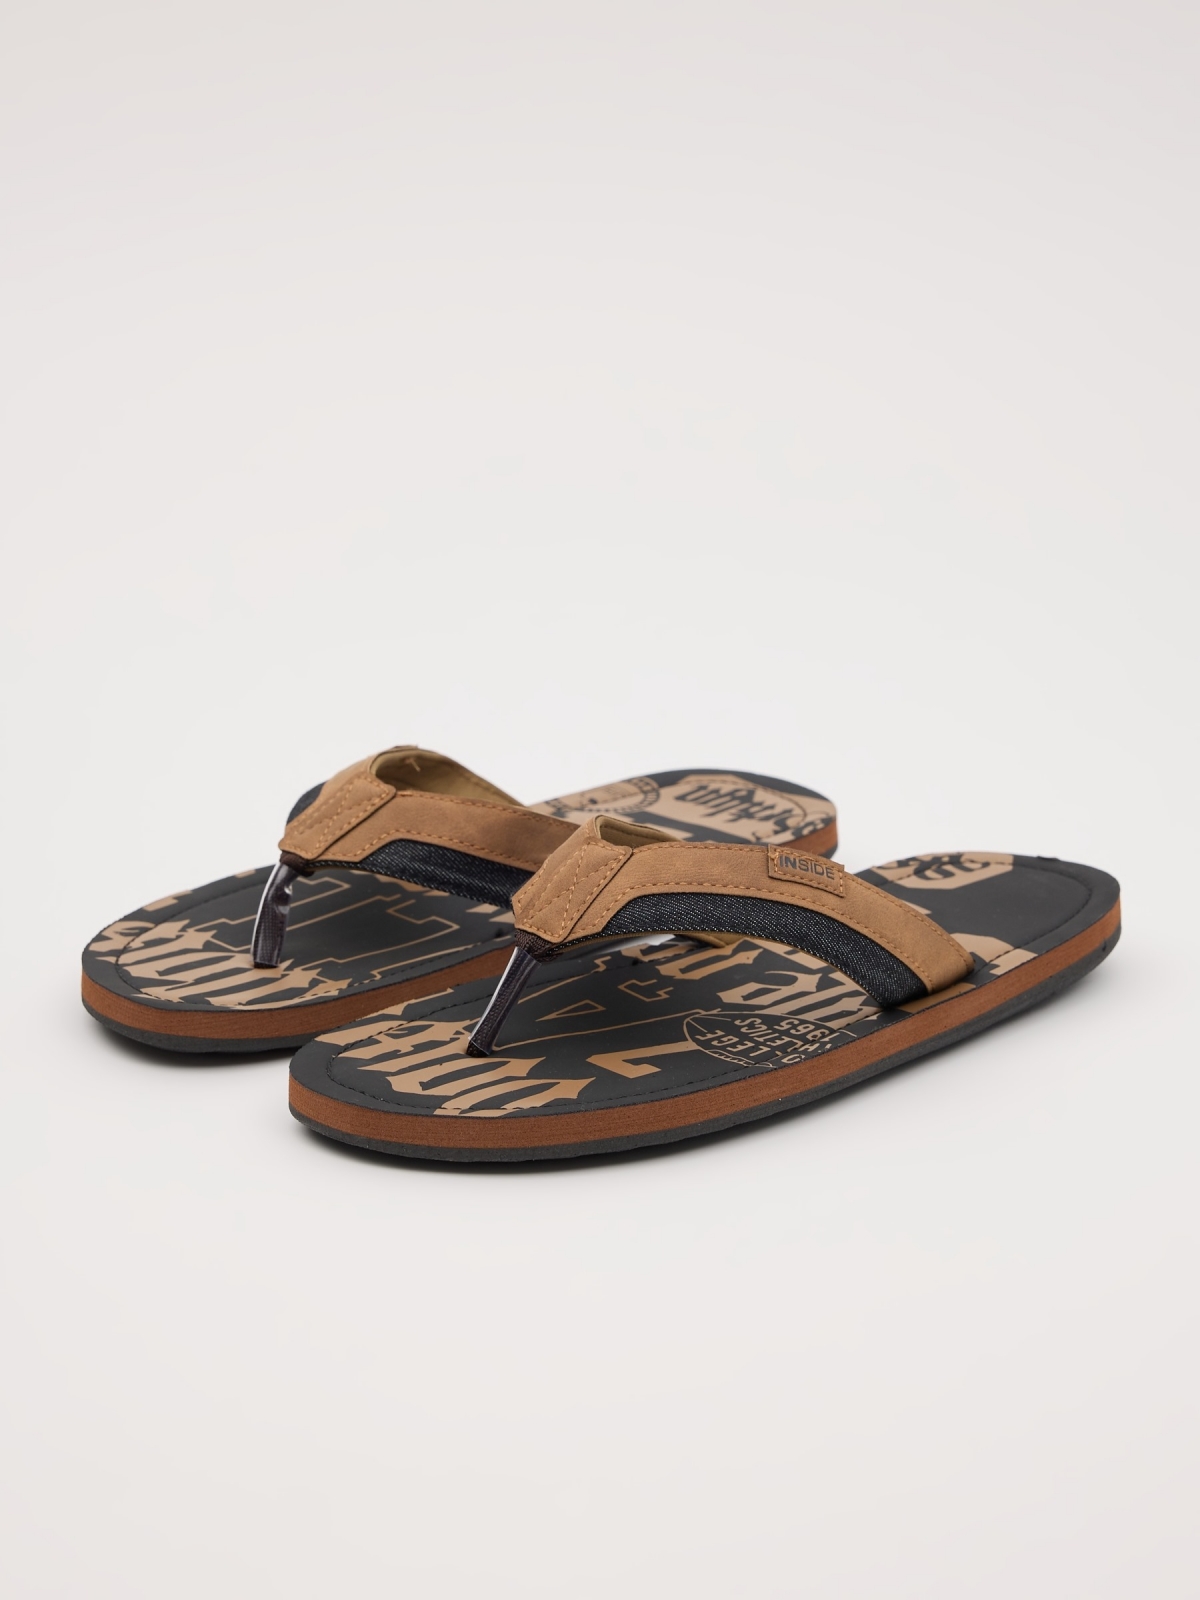 Leatherette toe sandal earth brown 45º front view